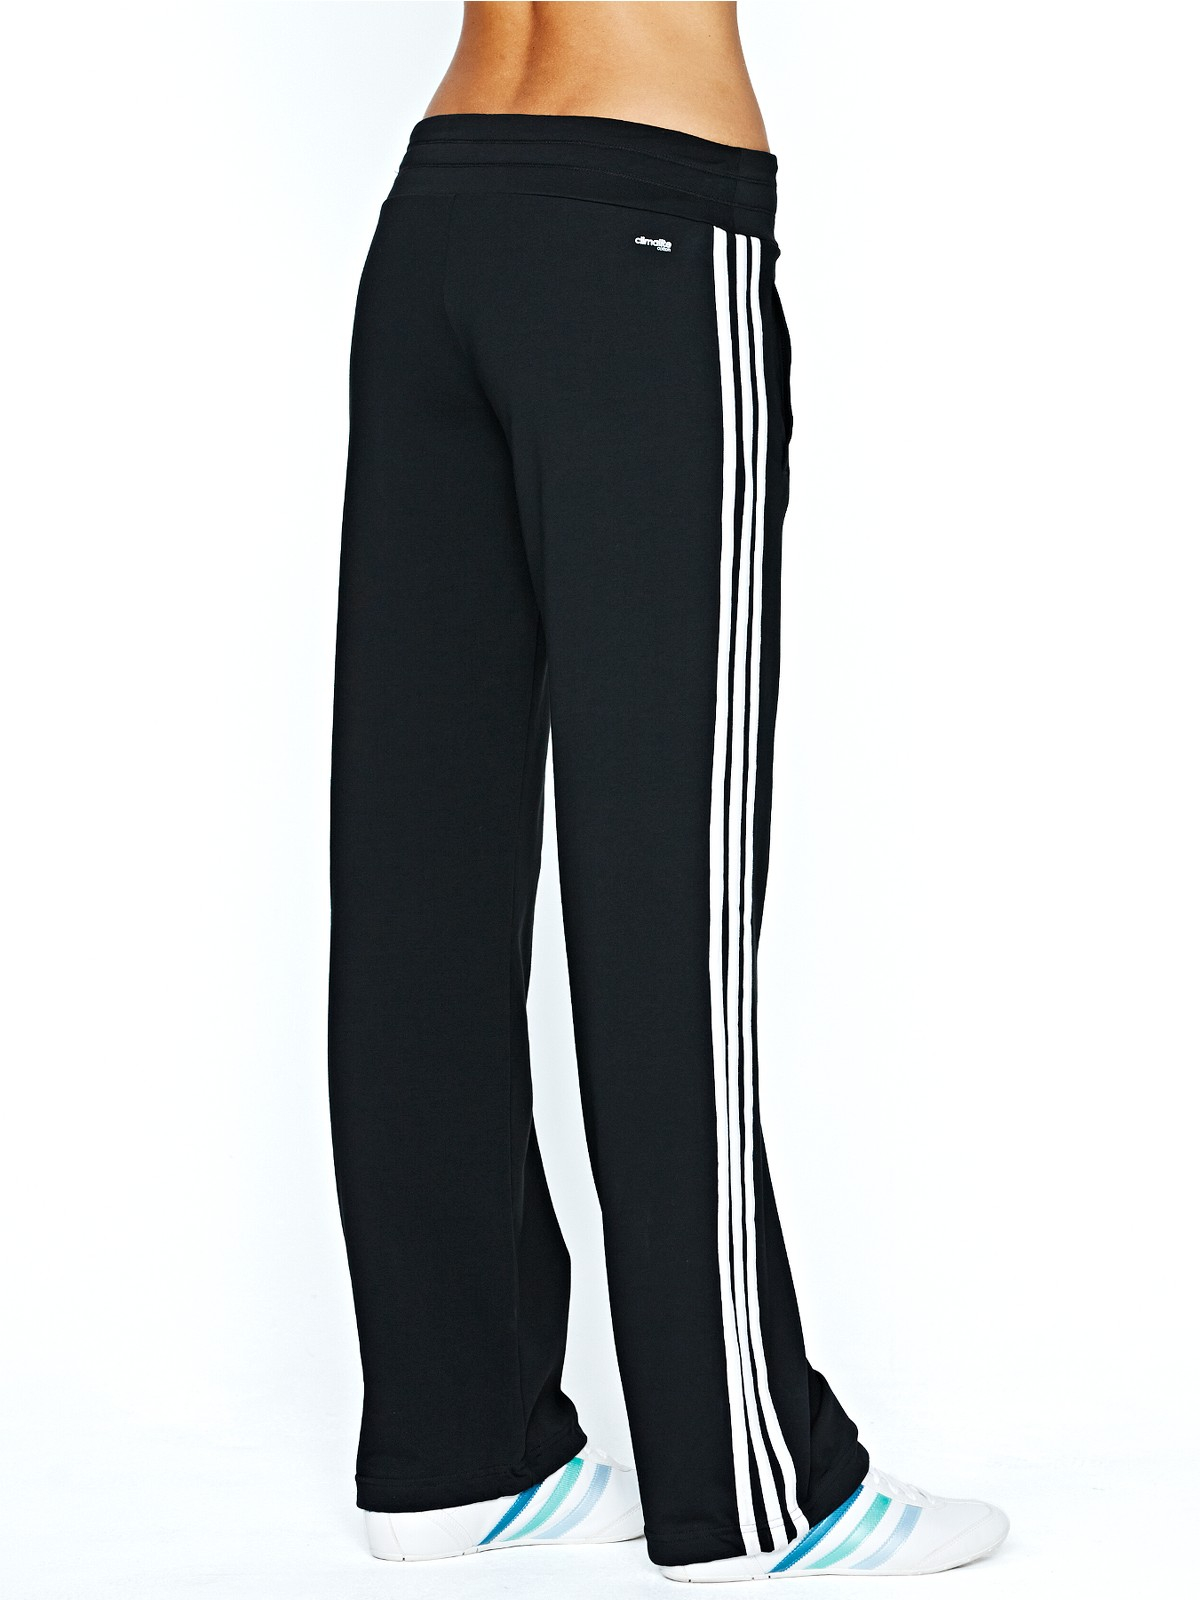 Adidas Adidas Climalite 3s Knit Pants in Black (black/white) | Lyst